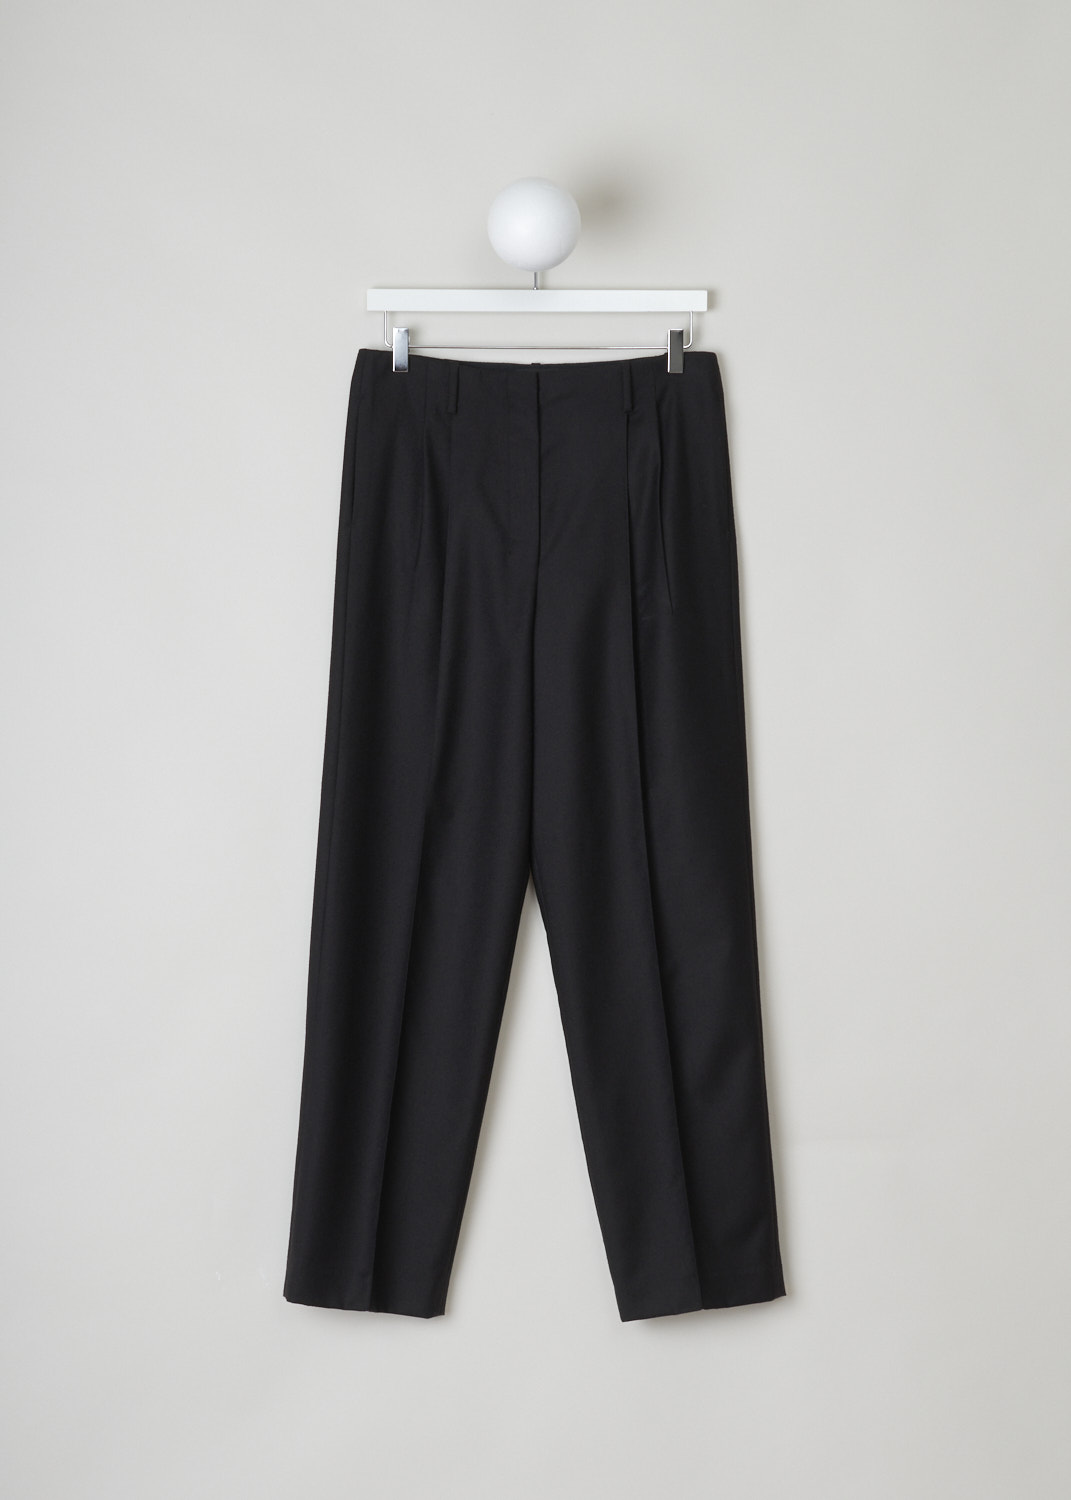 The Row, Double pleated black pants, firth_pant_3644W959_ebony, black, front, One of those must have basics, being this black pants. What makes this model stand out is the pleat on the front of the pants, which is sewn into the pants, meaning the crease will always be on point. Two forward slanted pockets can be found on the front and a single jetted pocket on the back. The fastening option here is a zipper, bearer button and a metal clip. 